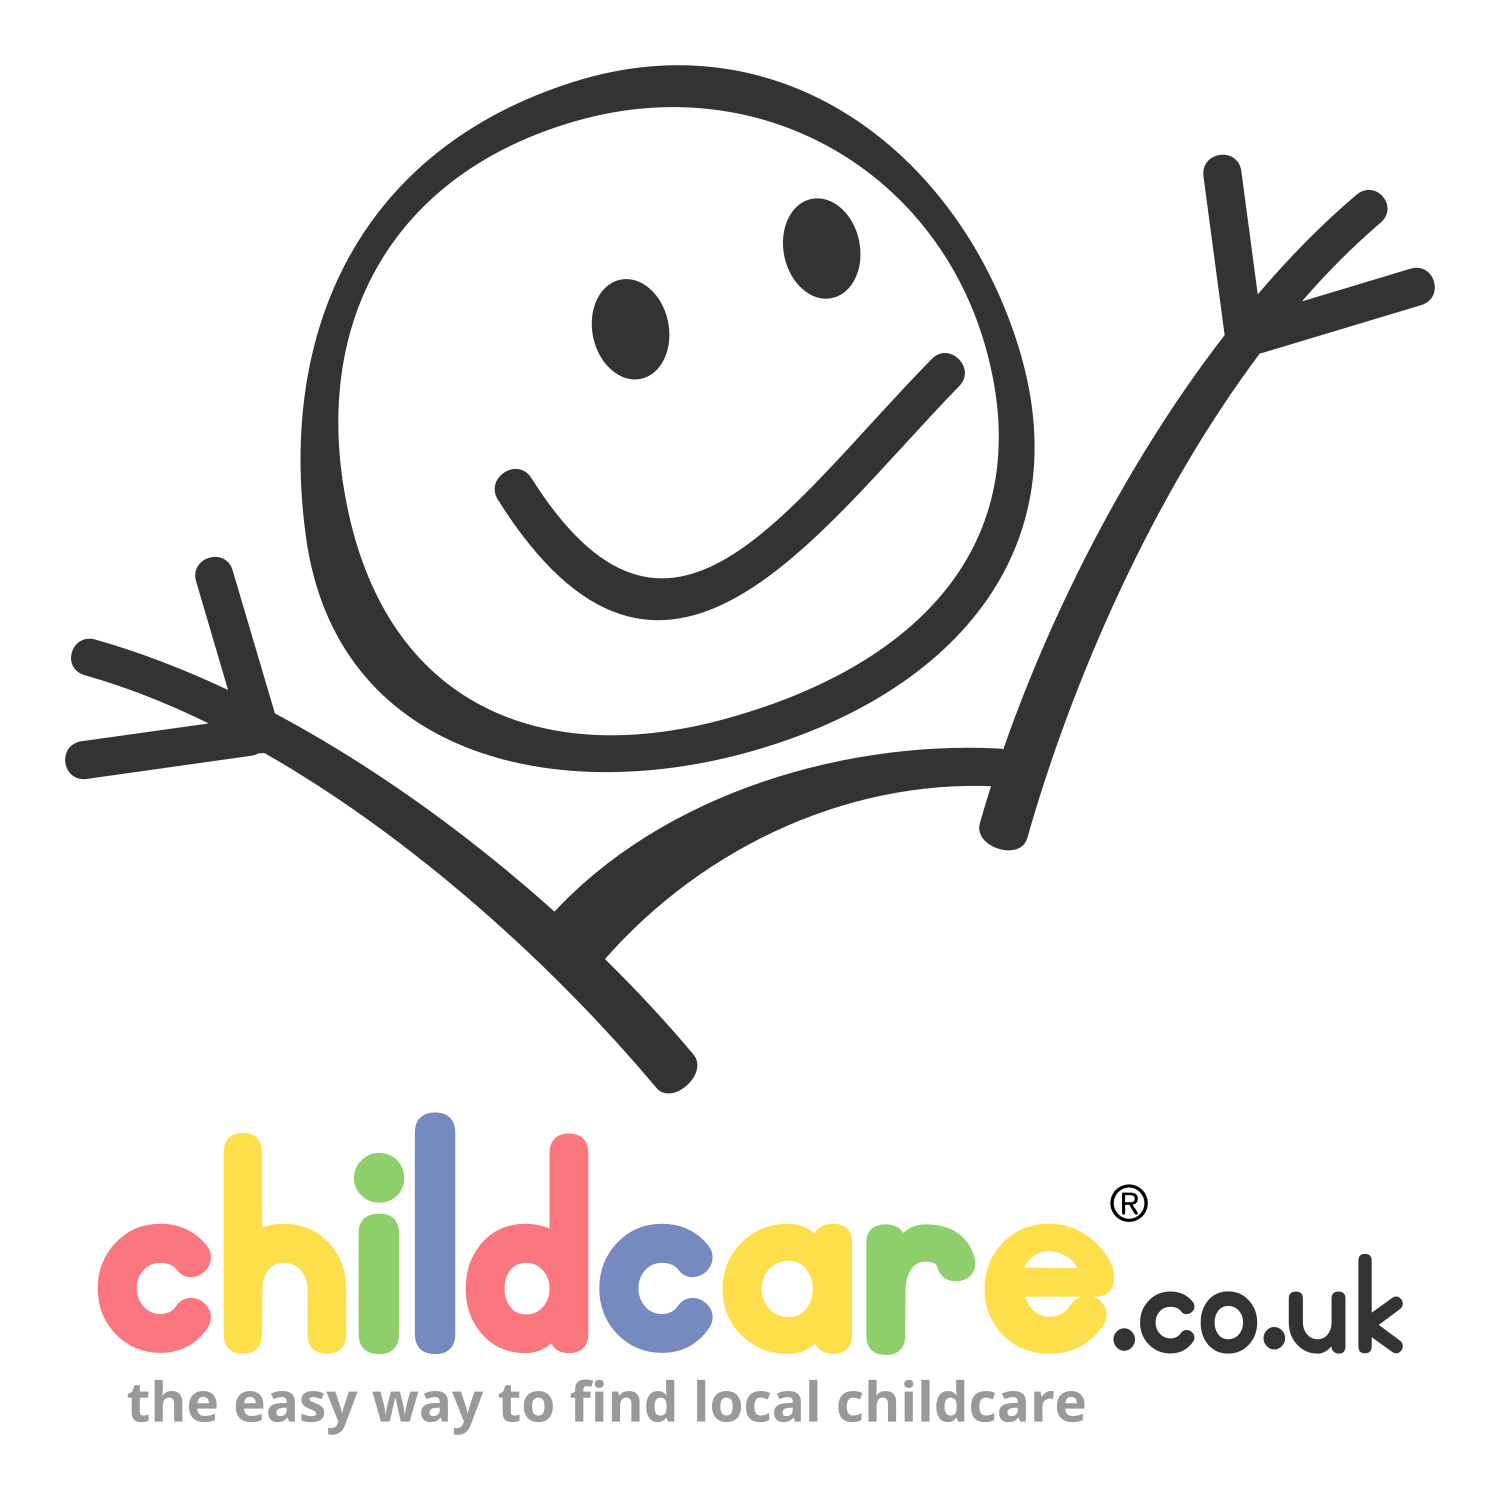  The easy way to find local childcare